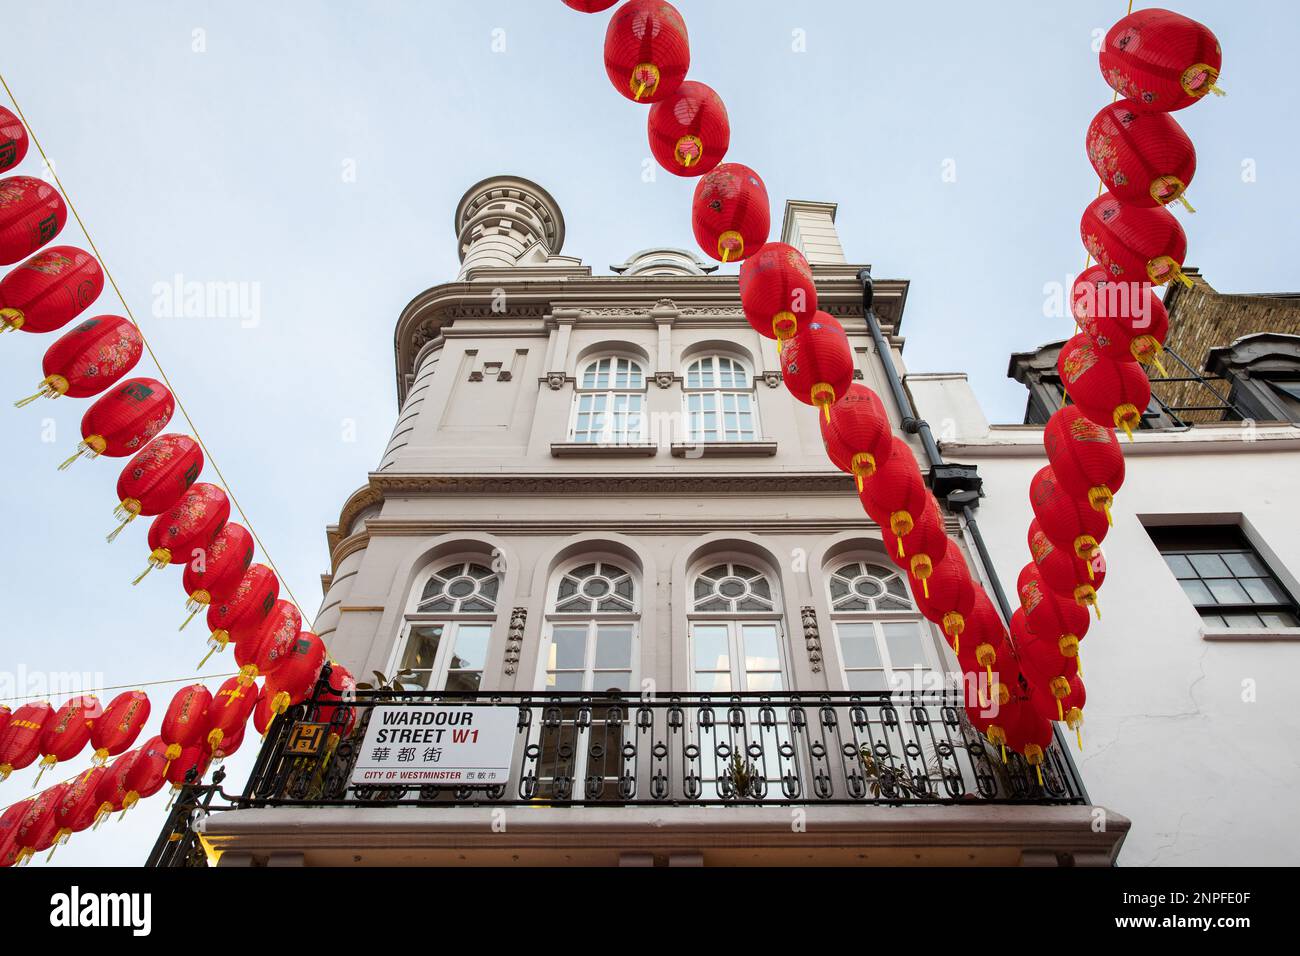 In Chinatown in London, fresh red lanterns are hung from the buildings to celebrate the Chinese New Year. This image shows the mix of eastern and west Stock Photo